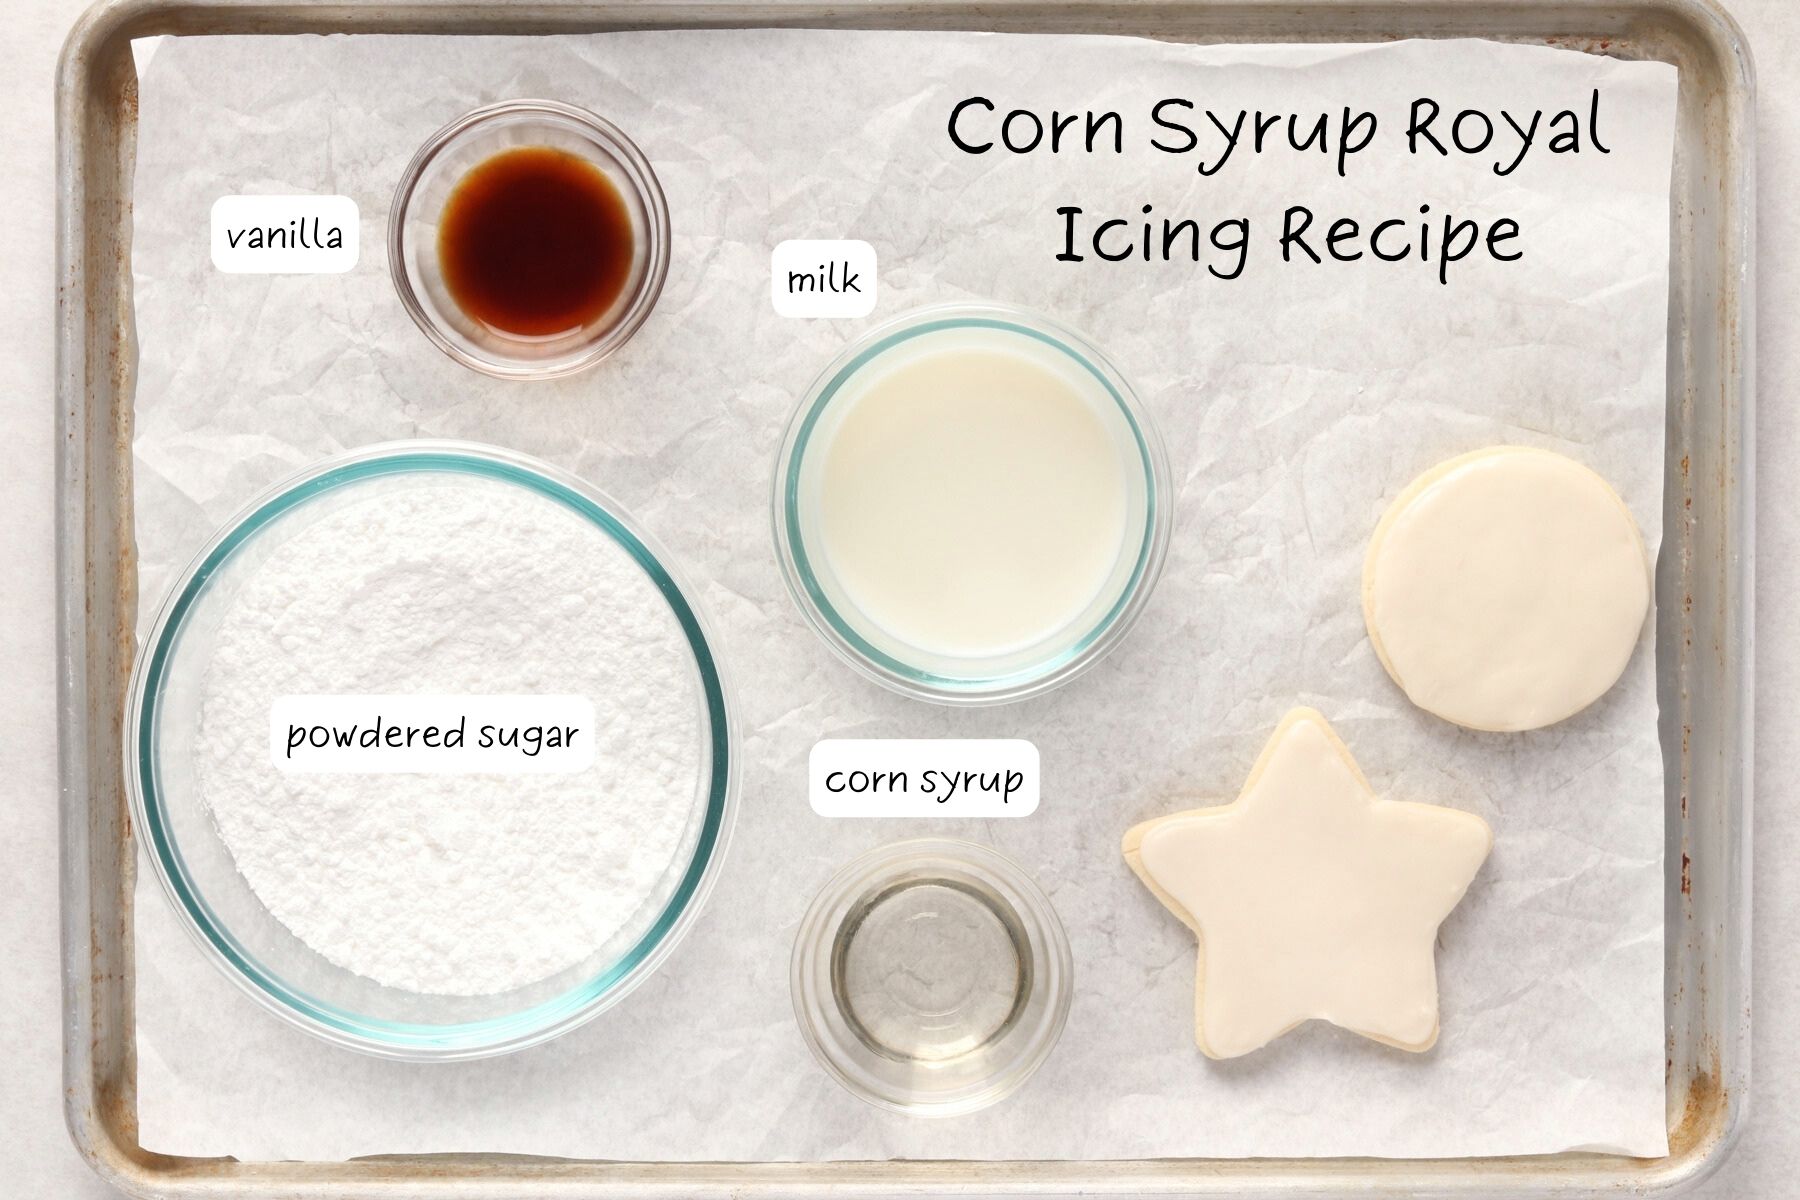 Ingredients for royal icing made without meringue powder. Powdered sugar, corn syrup, milk, and vanilla.